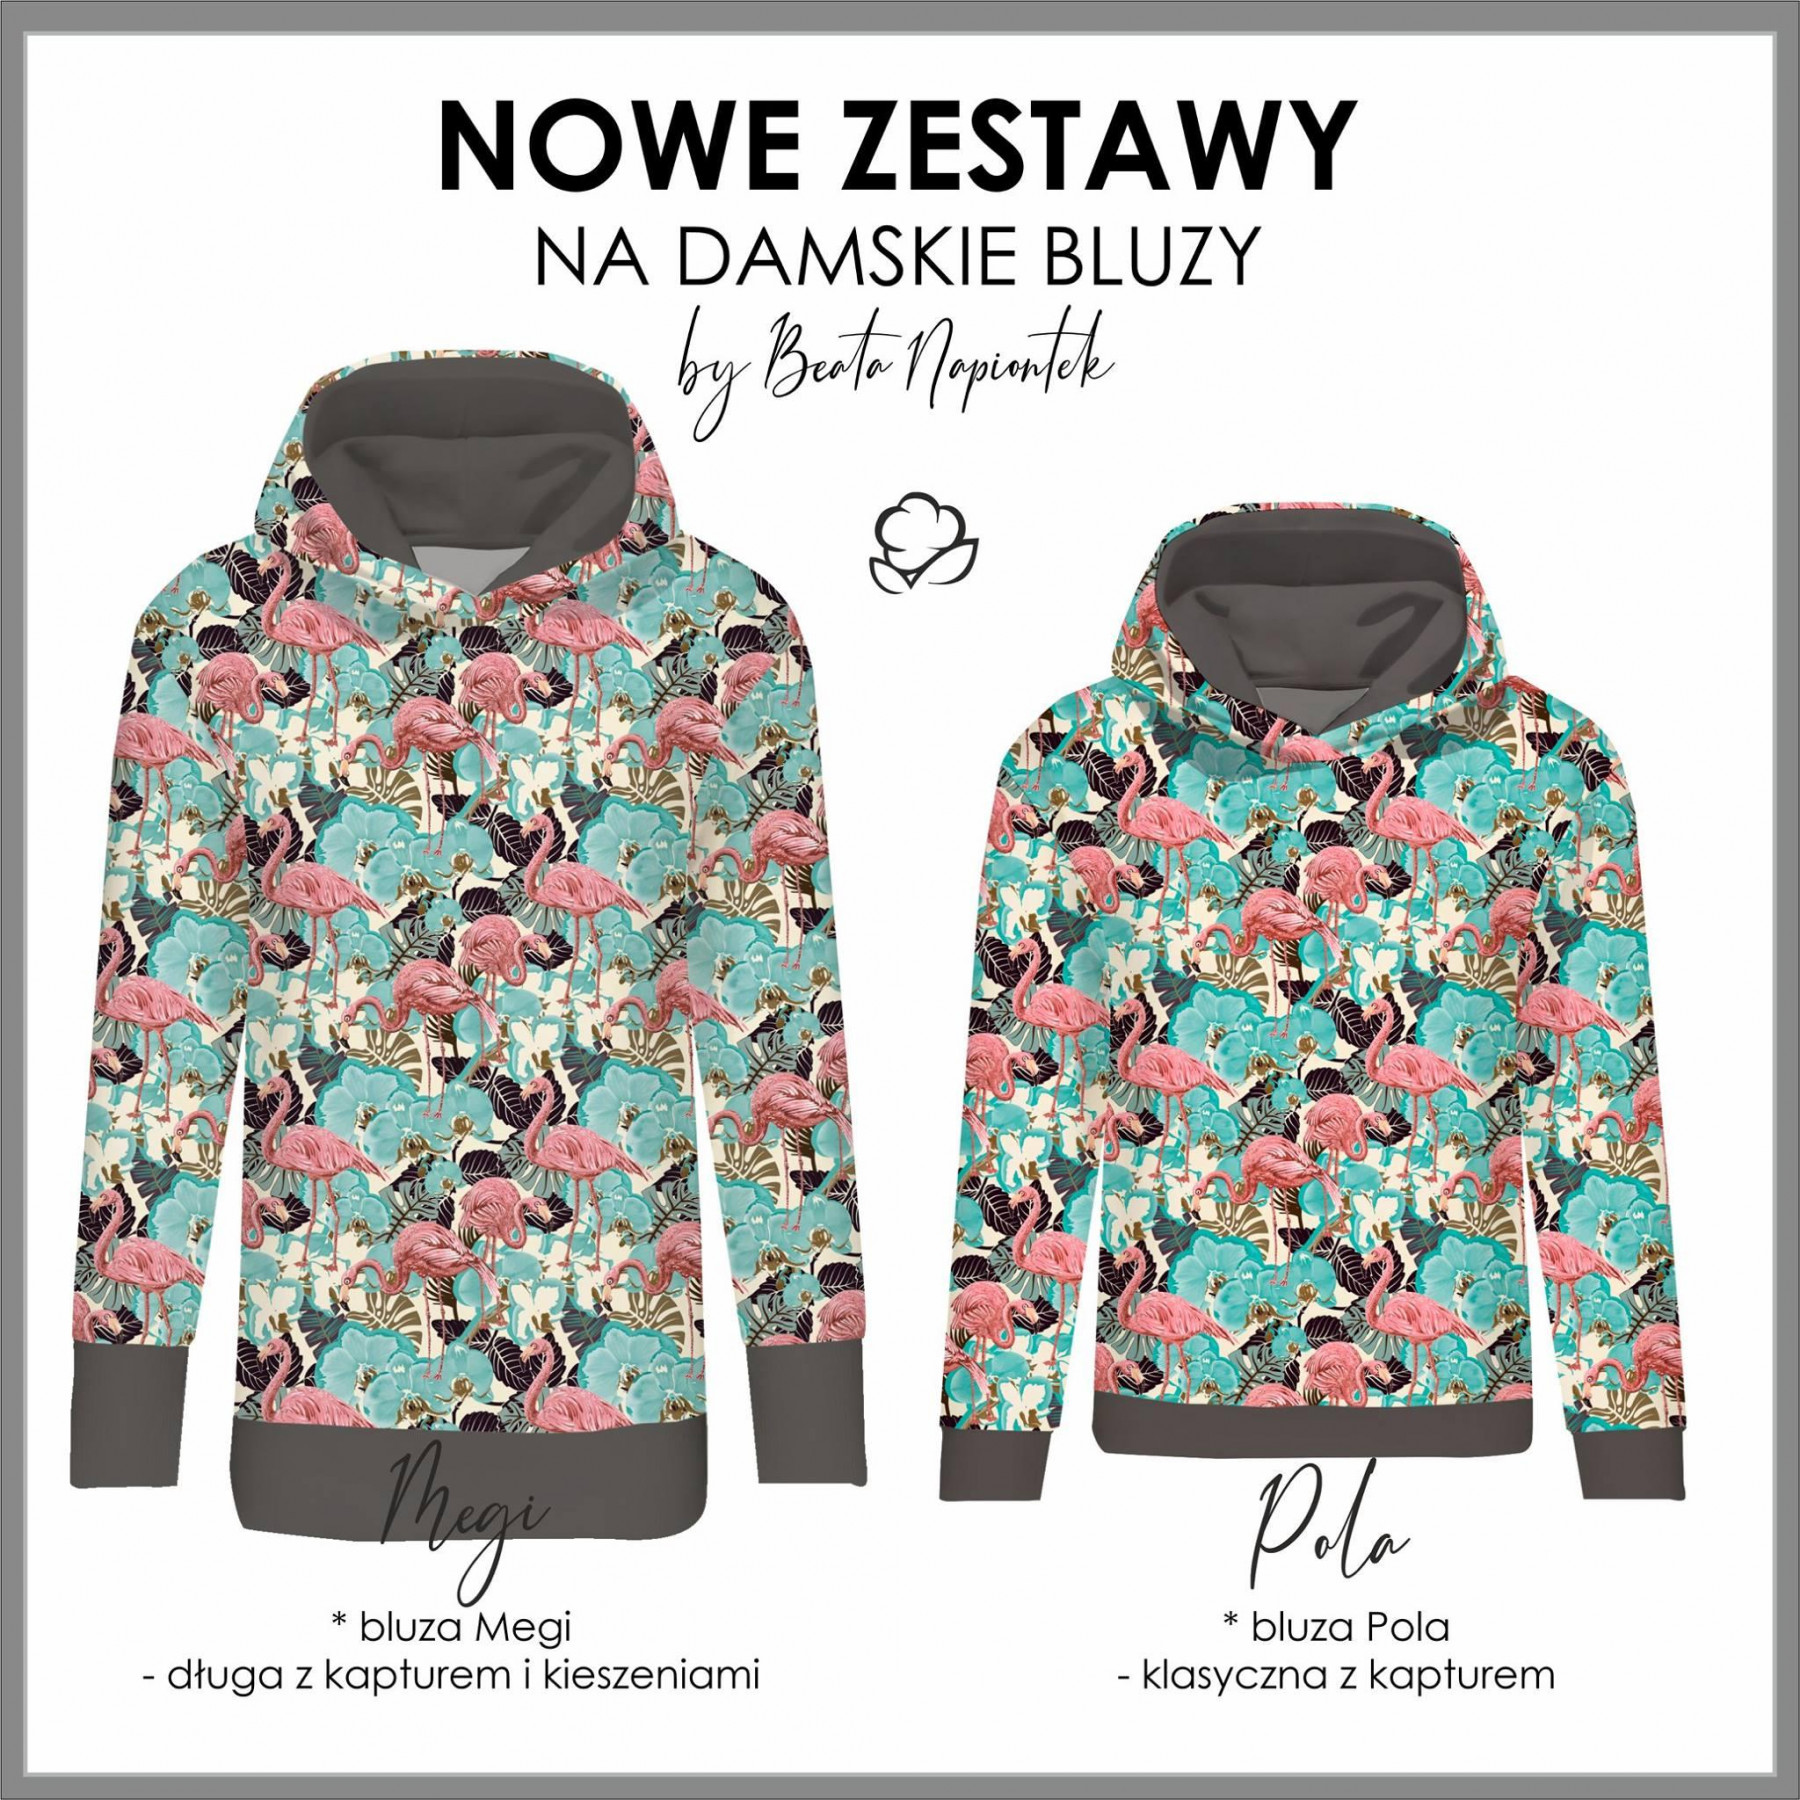 CLASSIC WOMEN’S HOODIE (POLA) - ADVENTURE TIME / galactic journey - looped knit fabric 